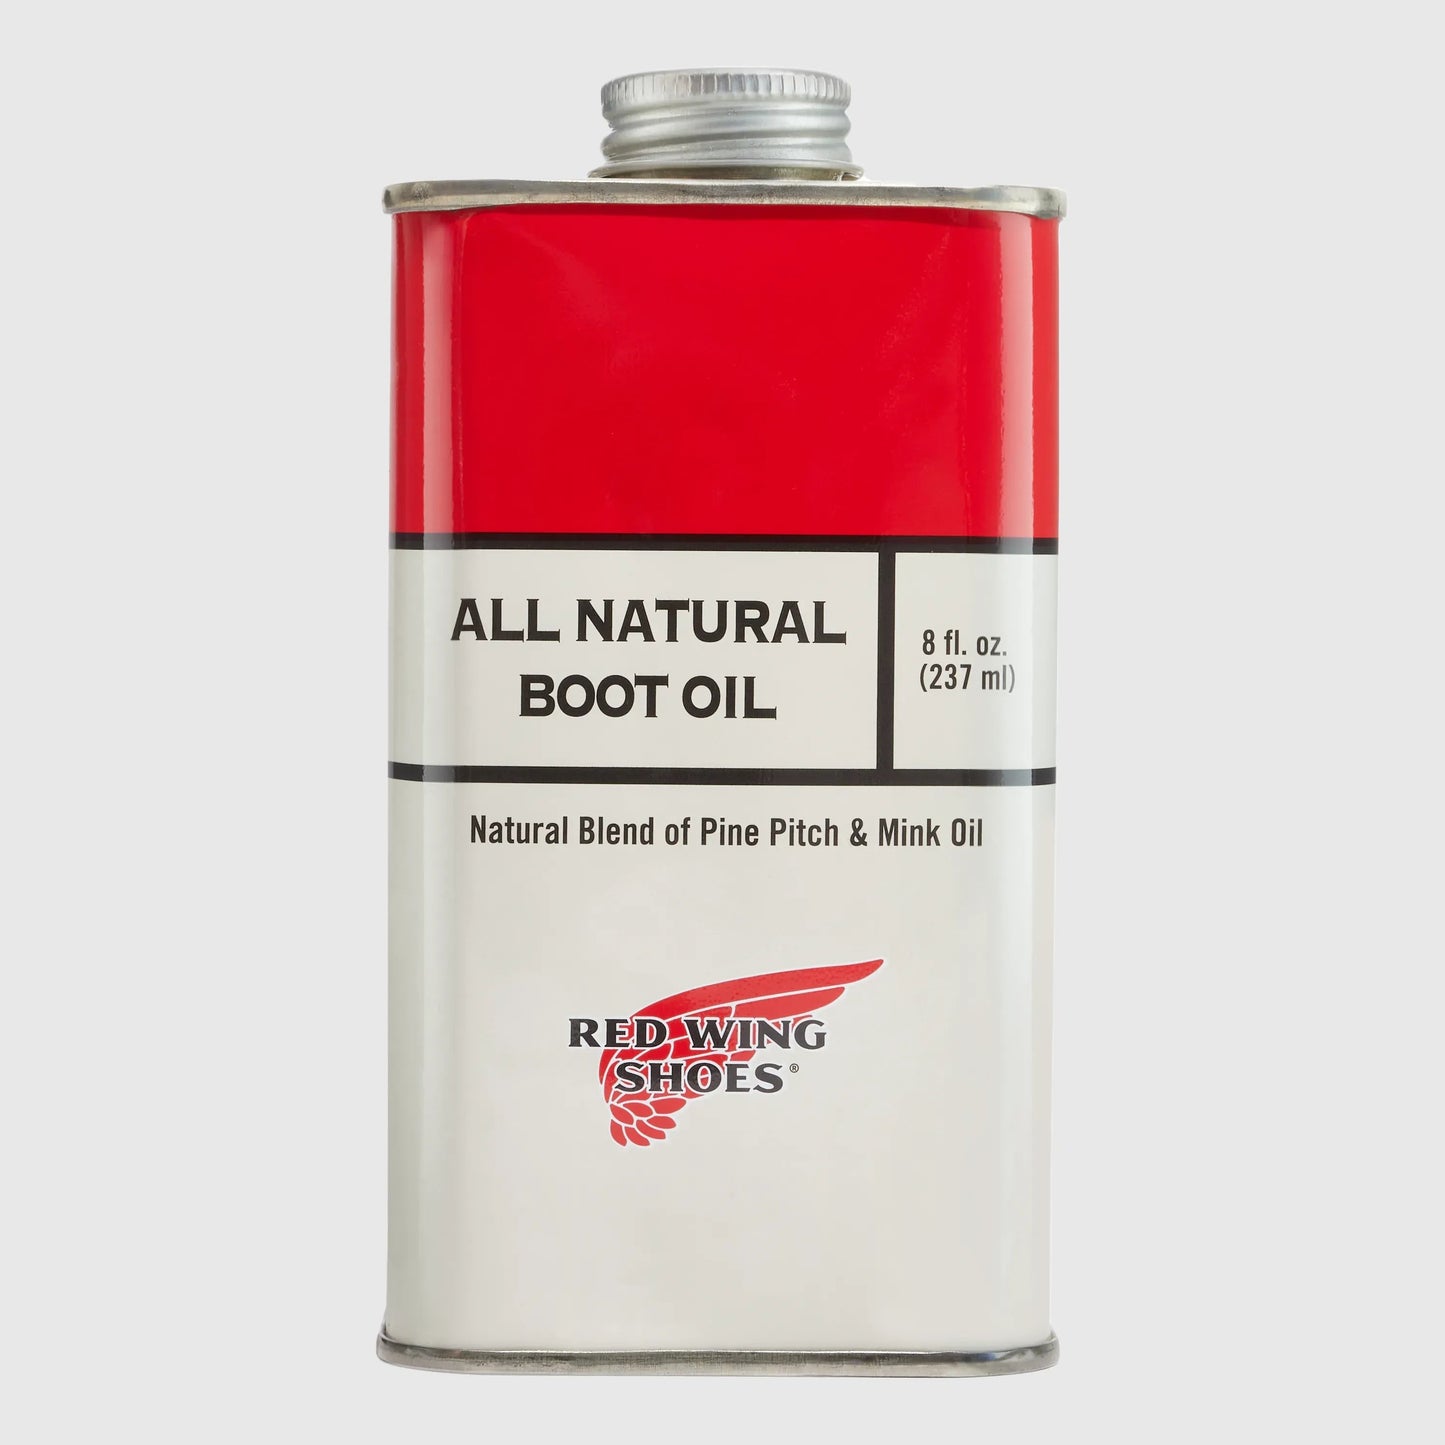 Red Wing All Natural Boot Oil Shoe Care Red Wing 